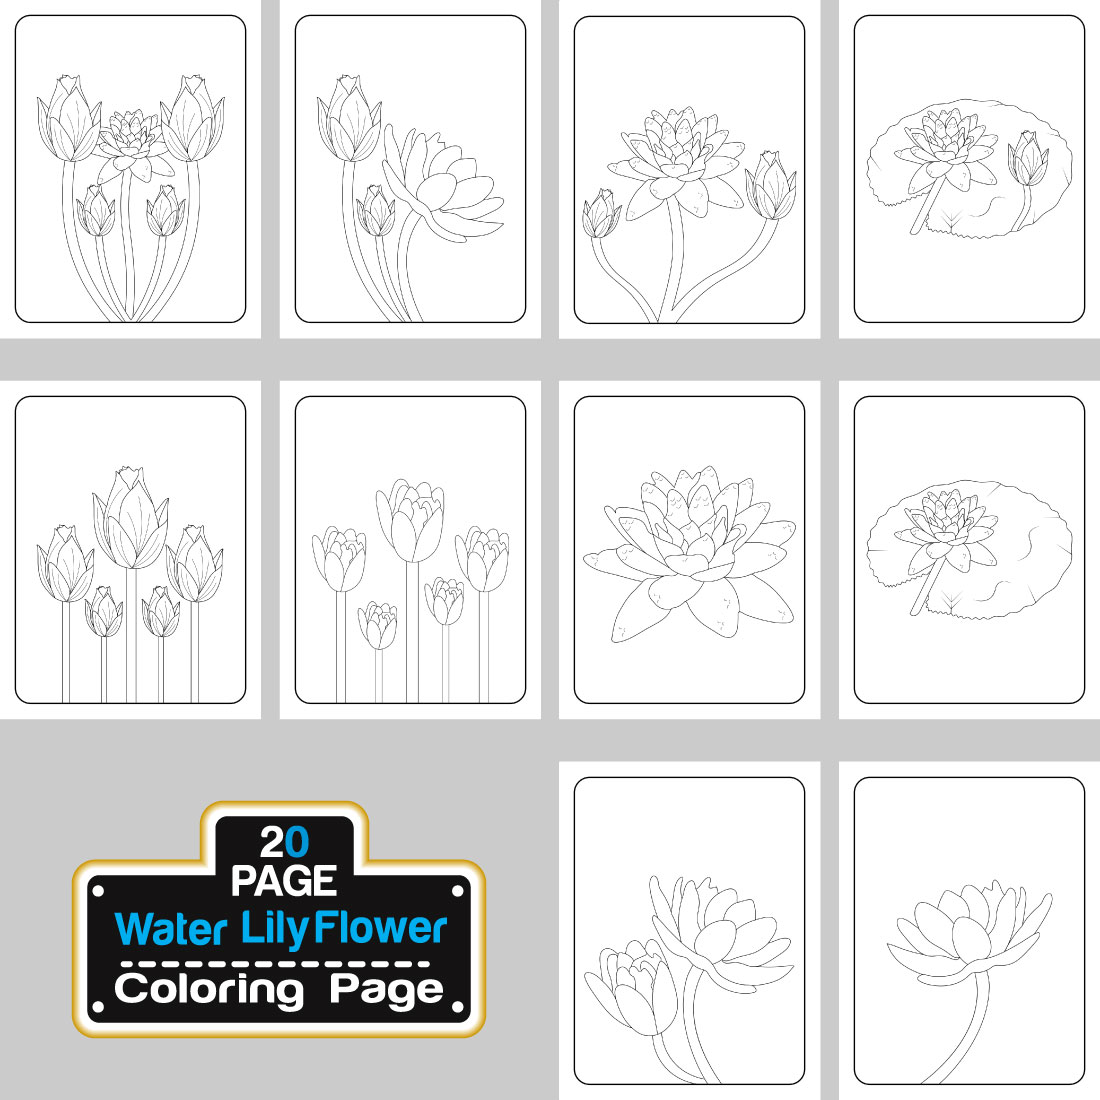 Water lily flower coloring page hand drawing line art vector illustration